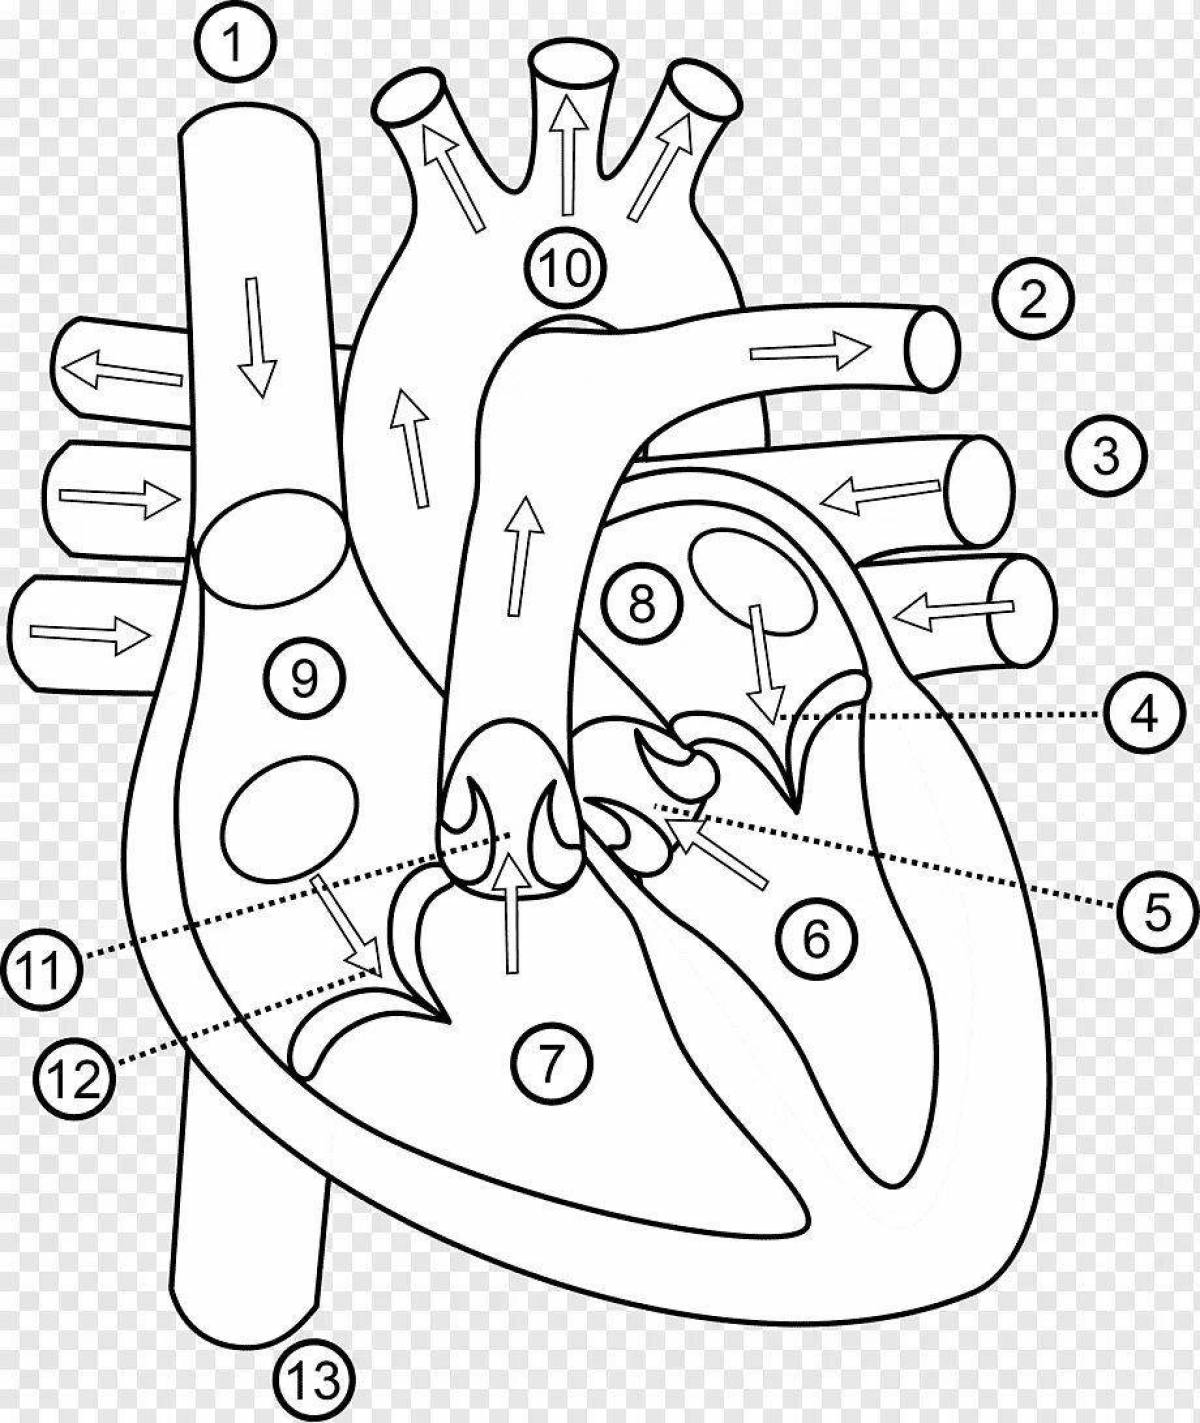 Impressive heart anatomy coloring page